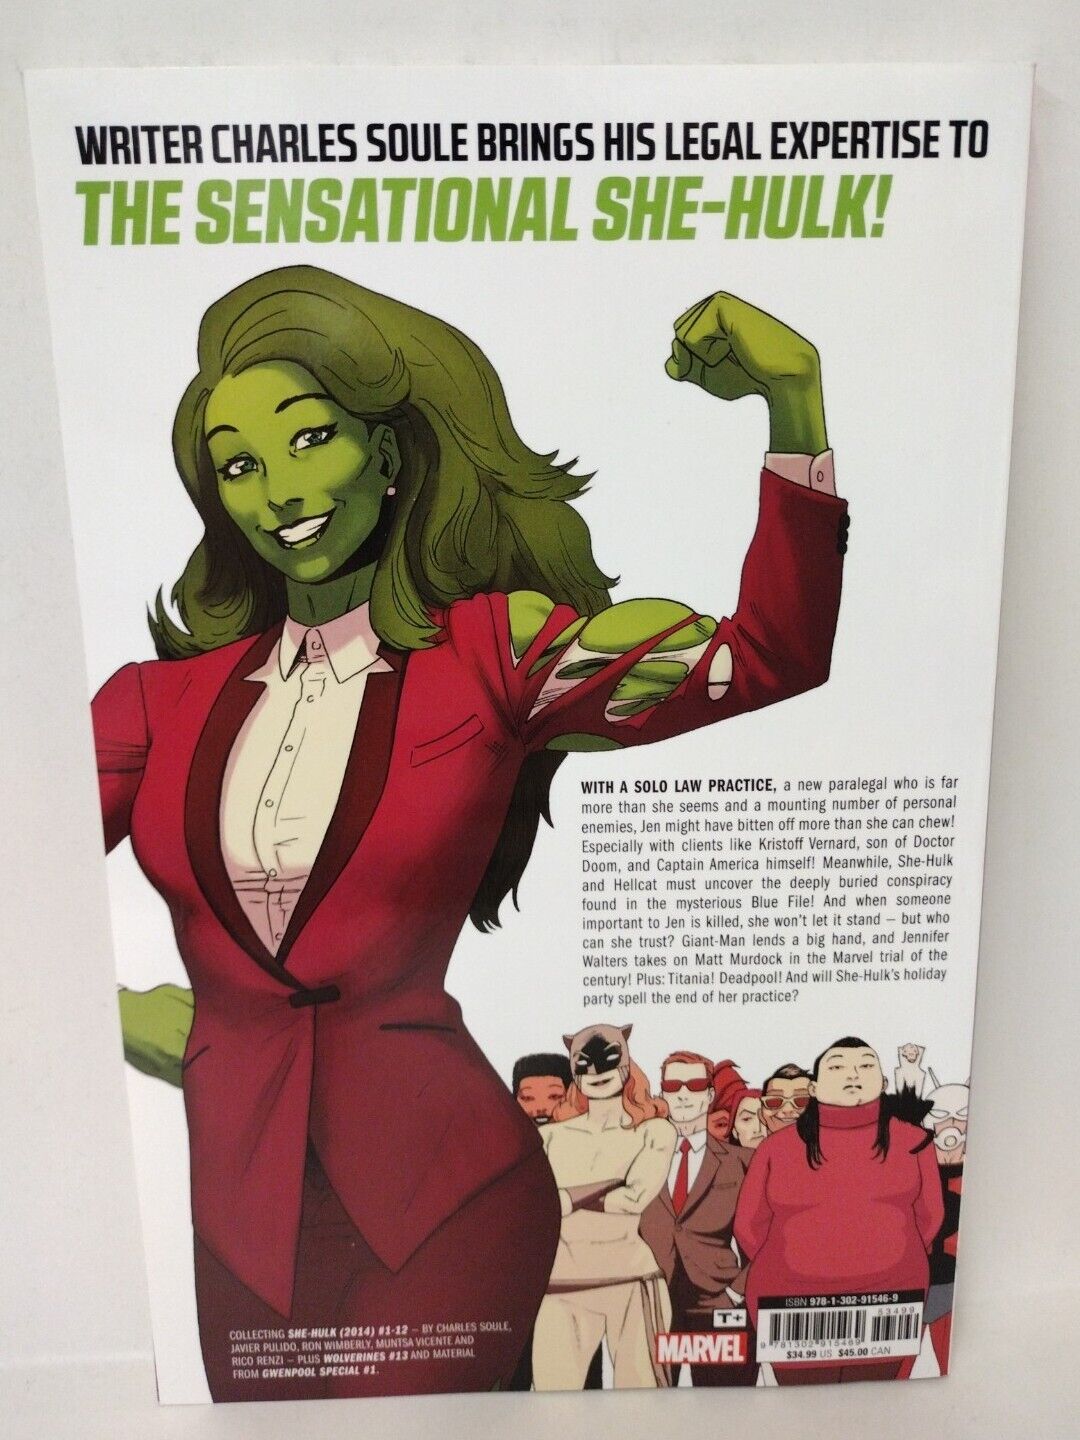 She-Hulk Complete Collection Vol 1 (2018) Marvel TPB Charles Soule Pulido New